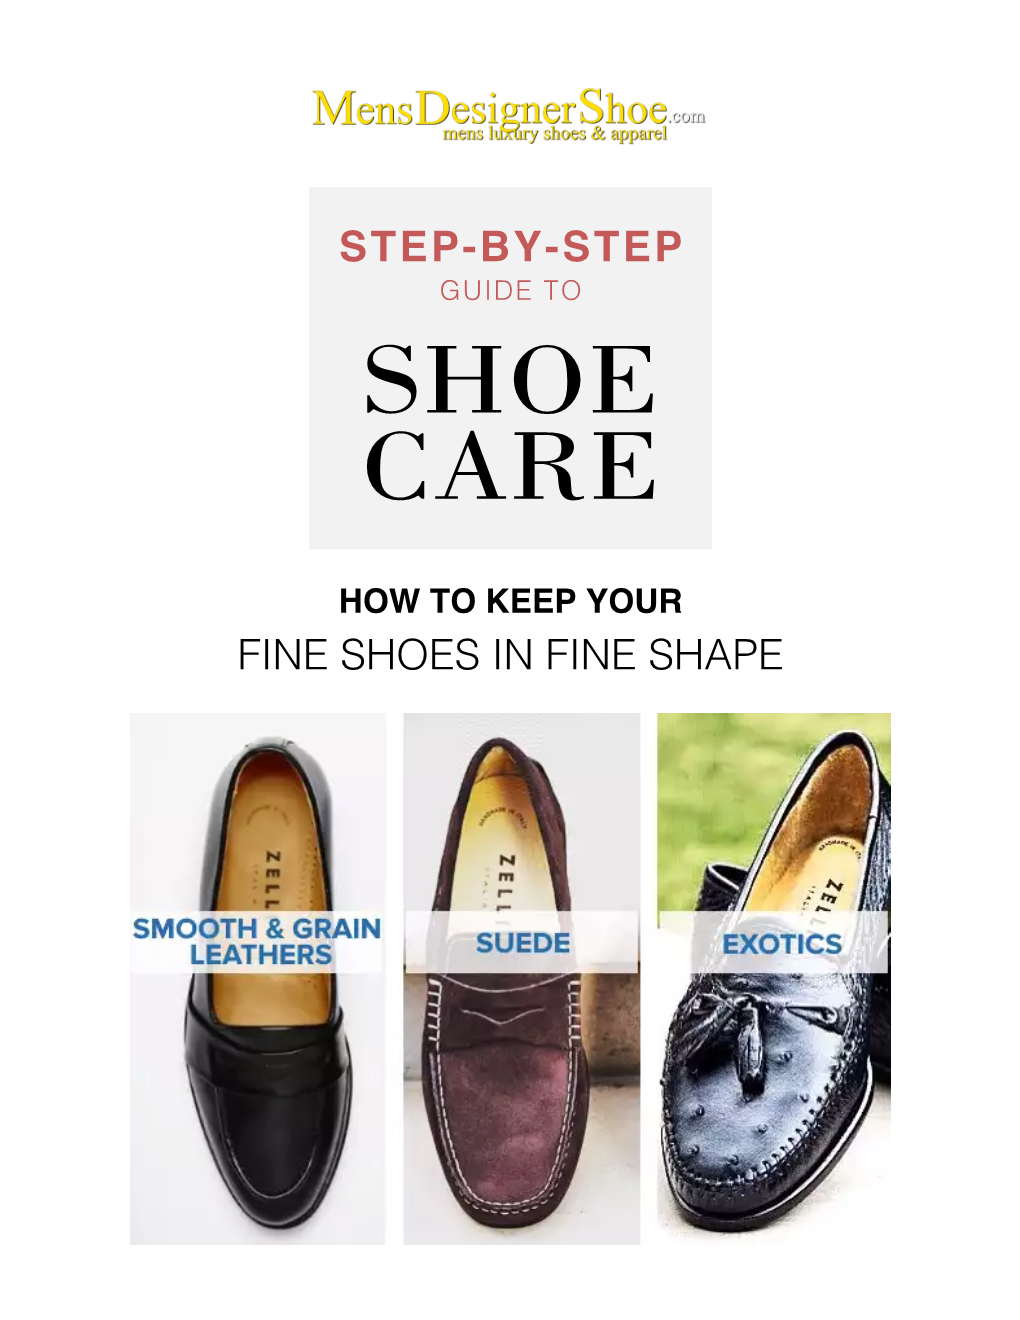 Guide to Shoe Care